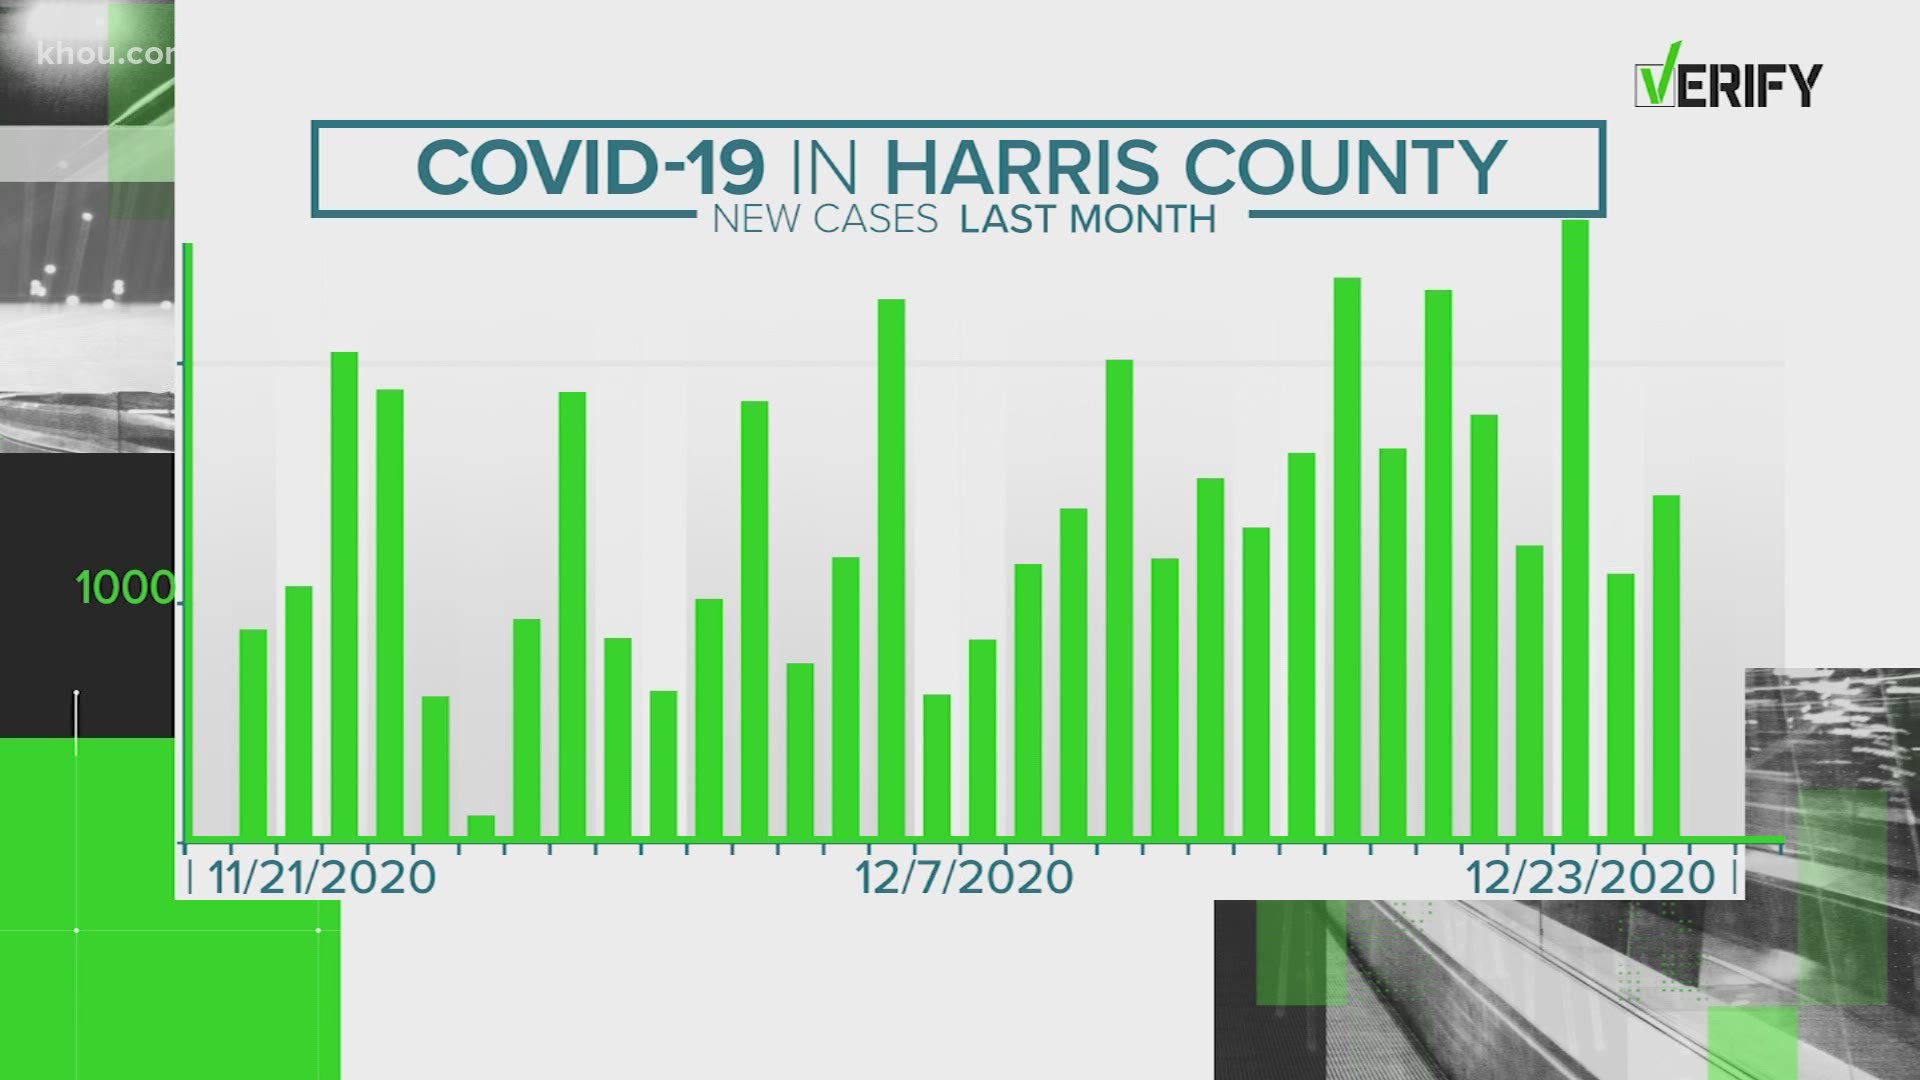 The VERIFY team has gotten plenty of questions recently about the flu after hearing rumor that more people died from the flu in recent years than from COVID-19.